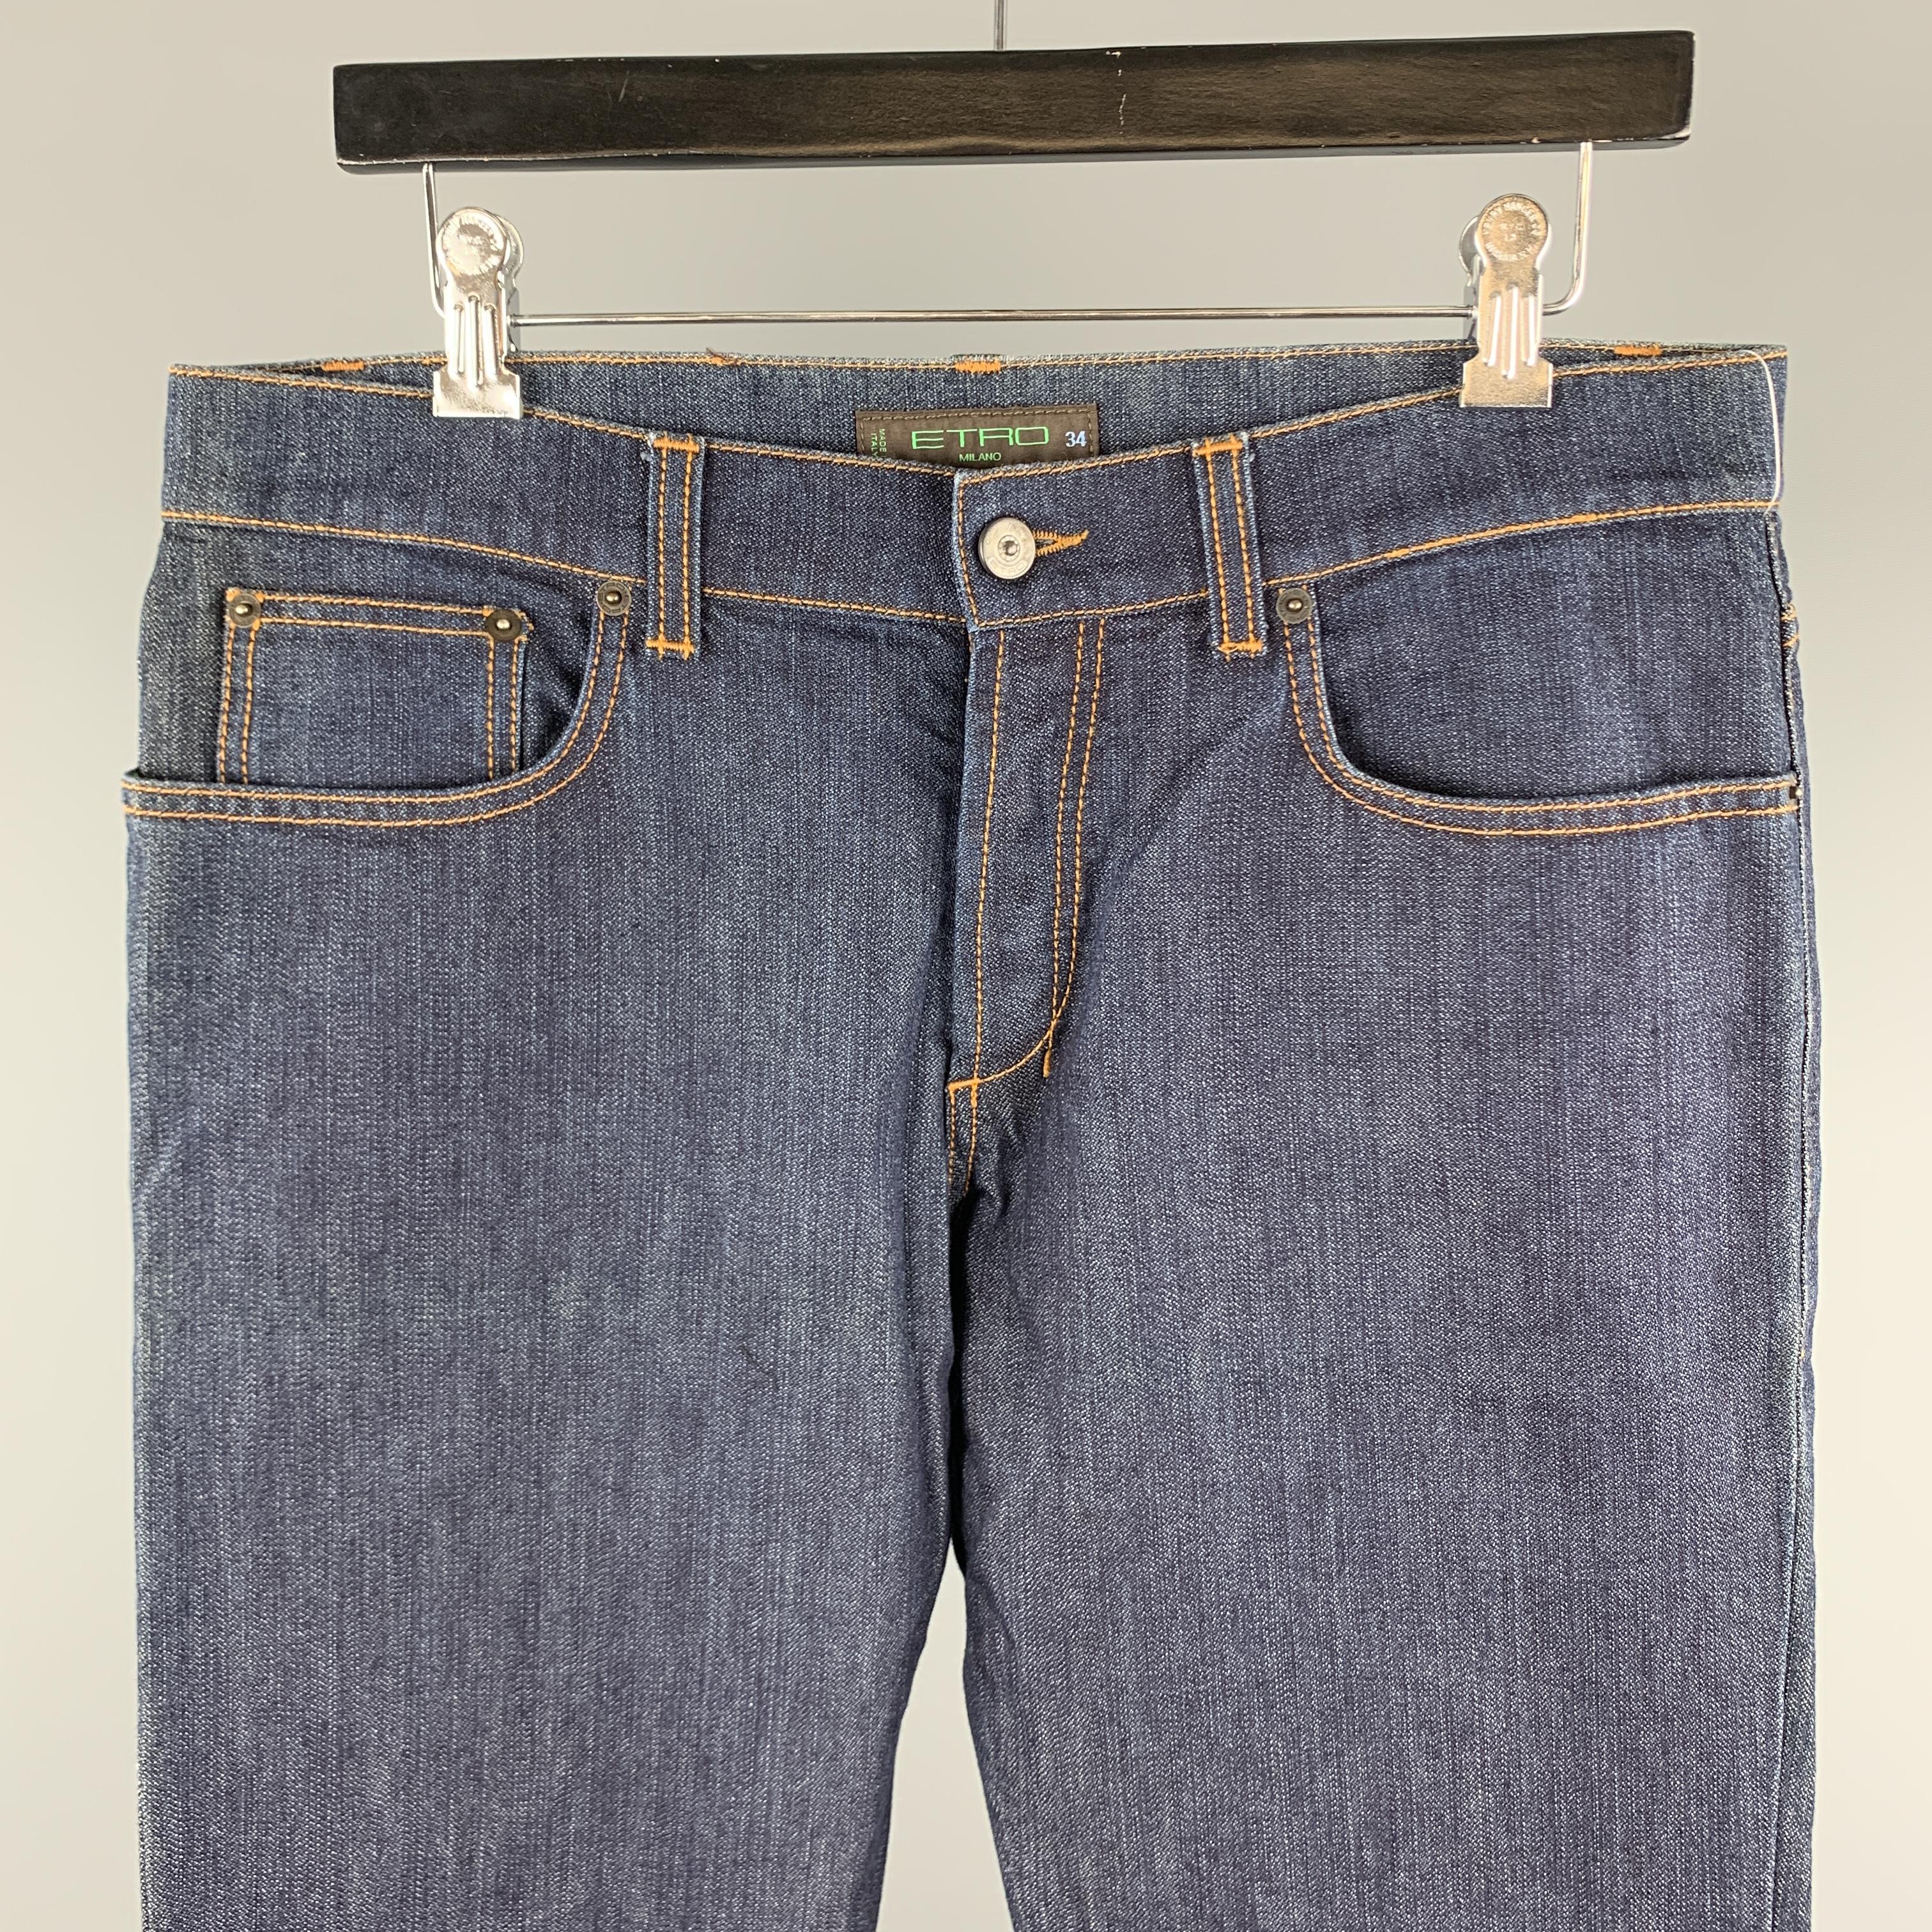 ETRO jeans comes in a indigo denim featuring contrast stitching details and a button fly closure. Made in Italy.
 

Excellent Pre-Owned Condition.
Marked: 34

Measurements:

Waist: 34 in. 
Rise: 9 in. 
Inseam: 34 in. 